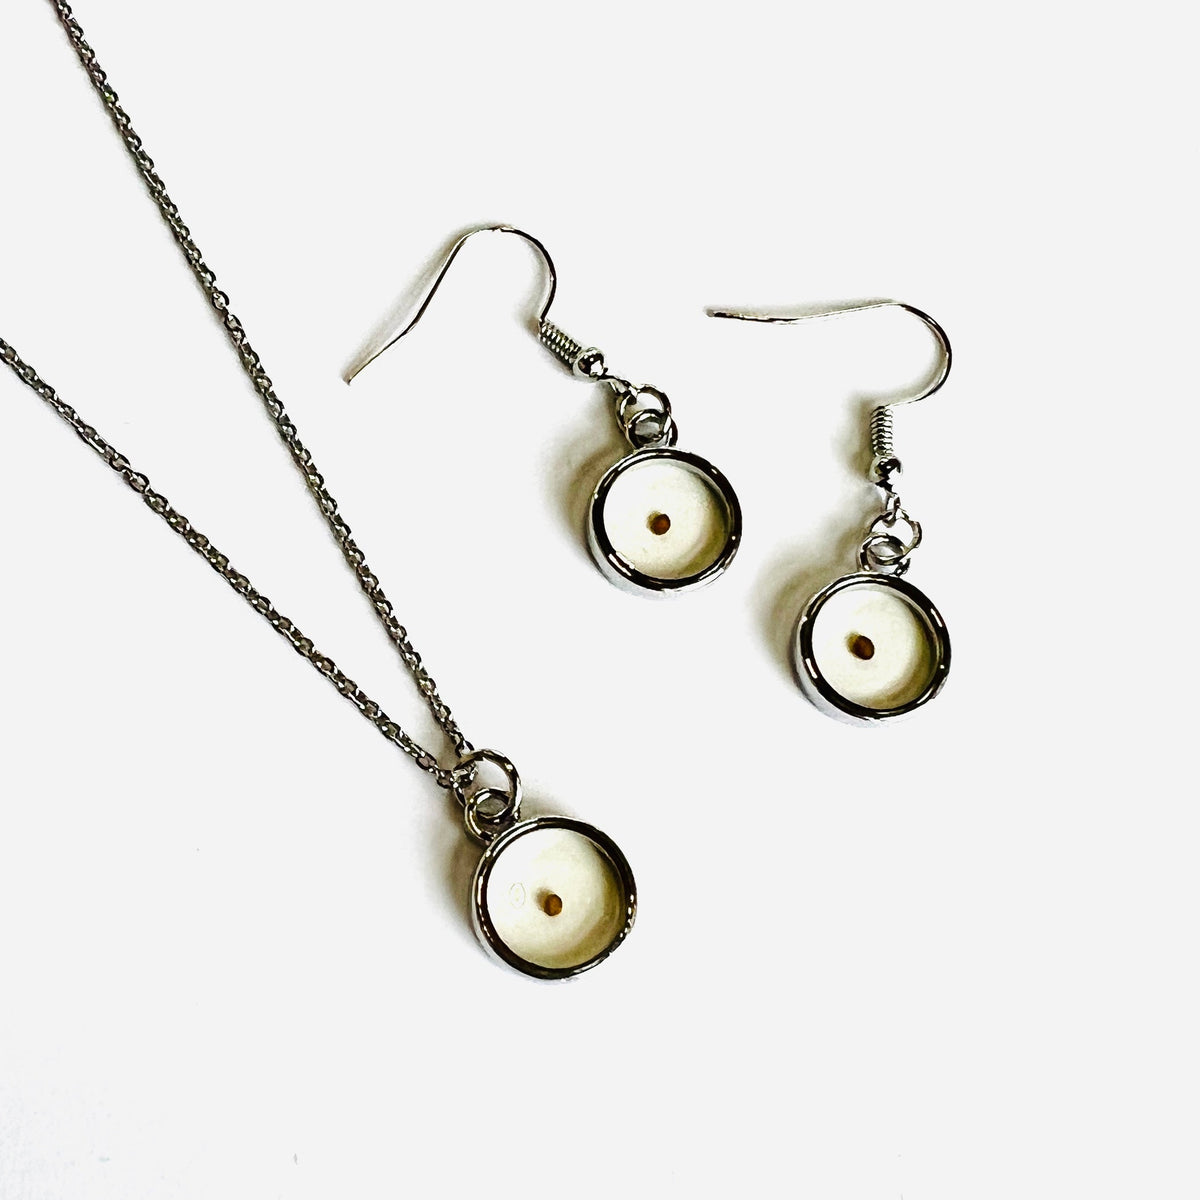 Mustard Seed Necklace Jewelry - 